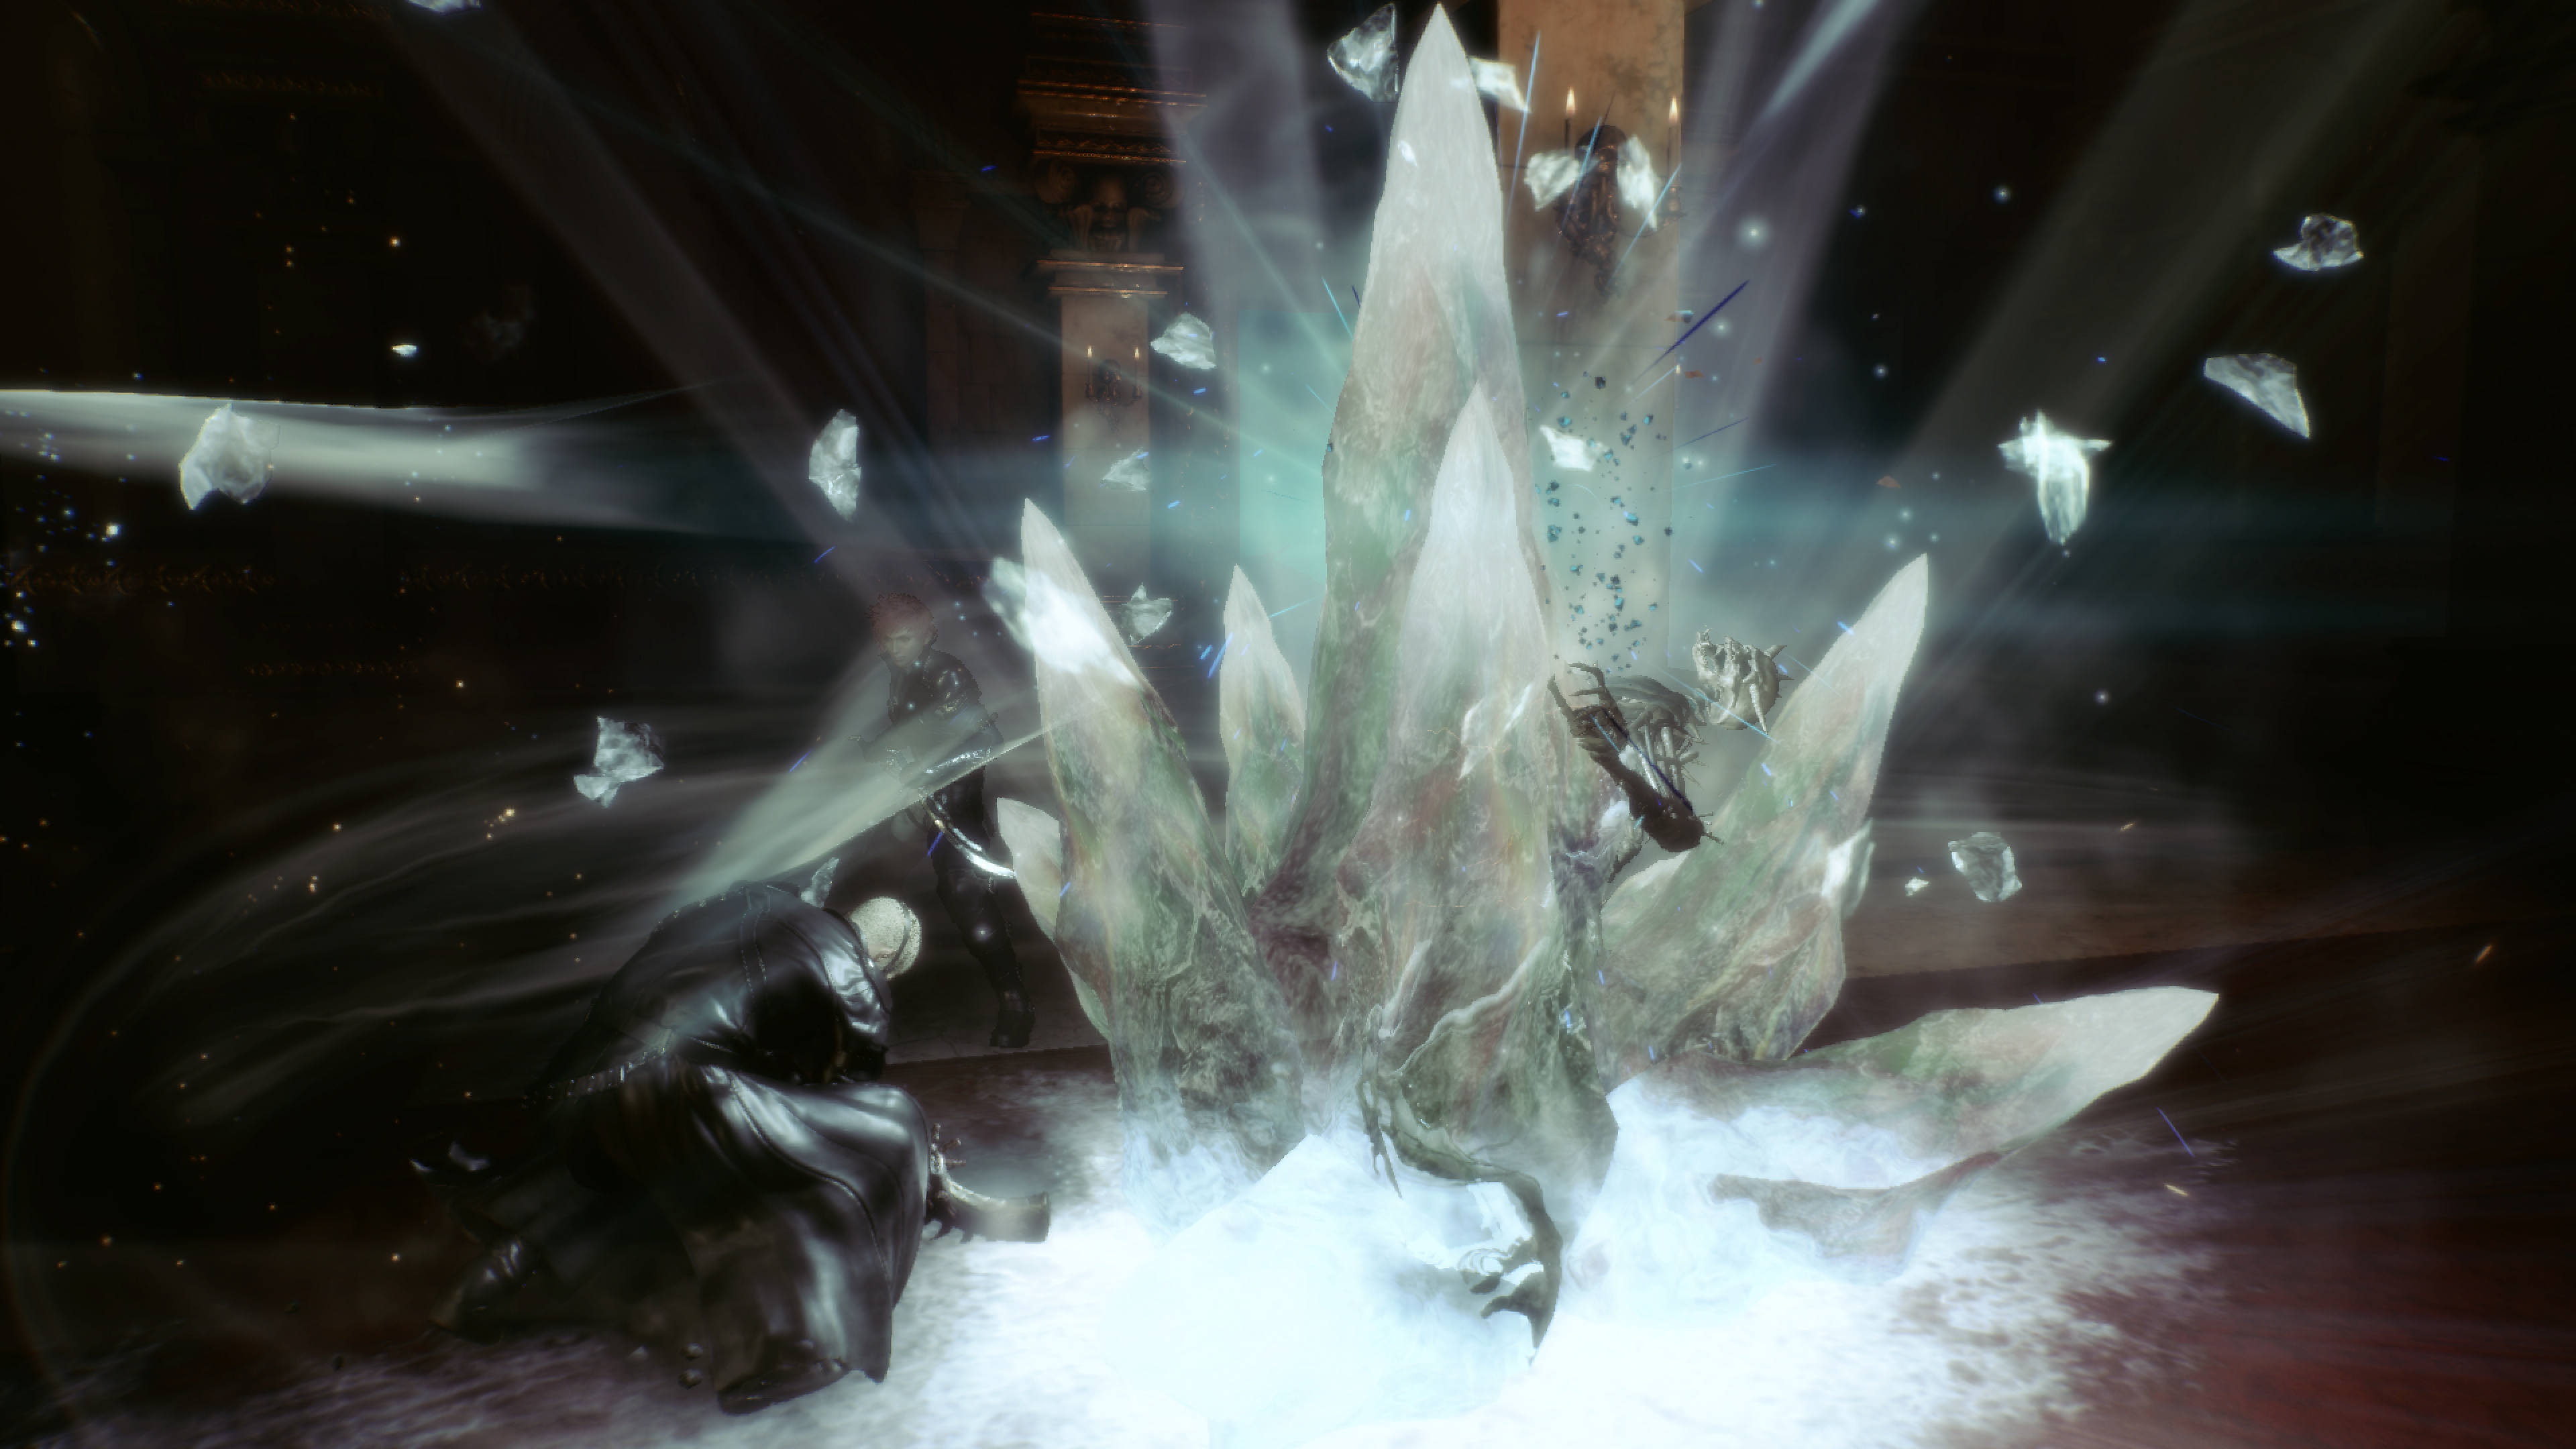 Stranger of Paradise Final Fantasy Origin screenshot showing Jack and a large white crystal shard jutting from the ground.